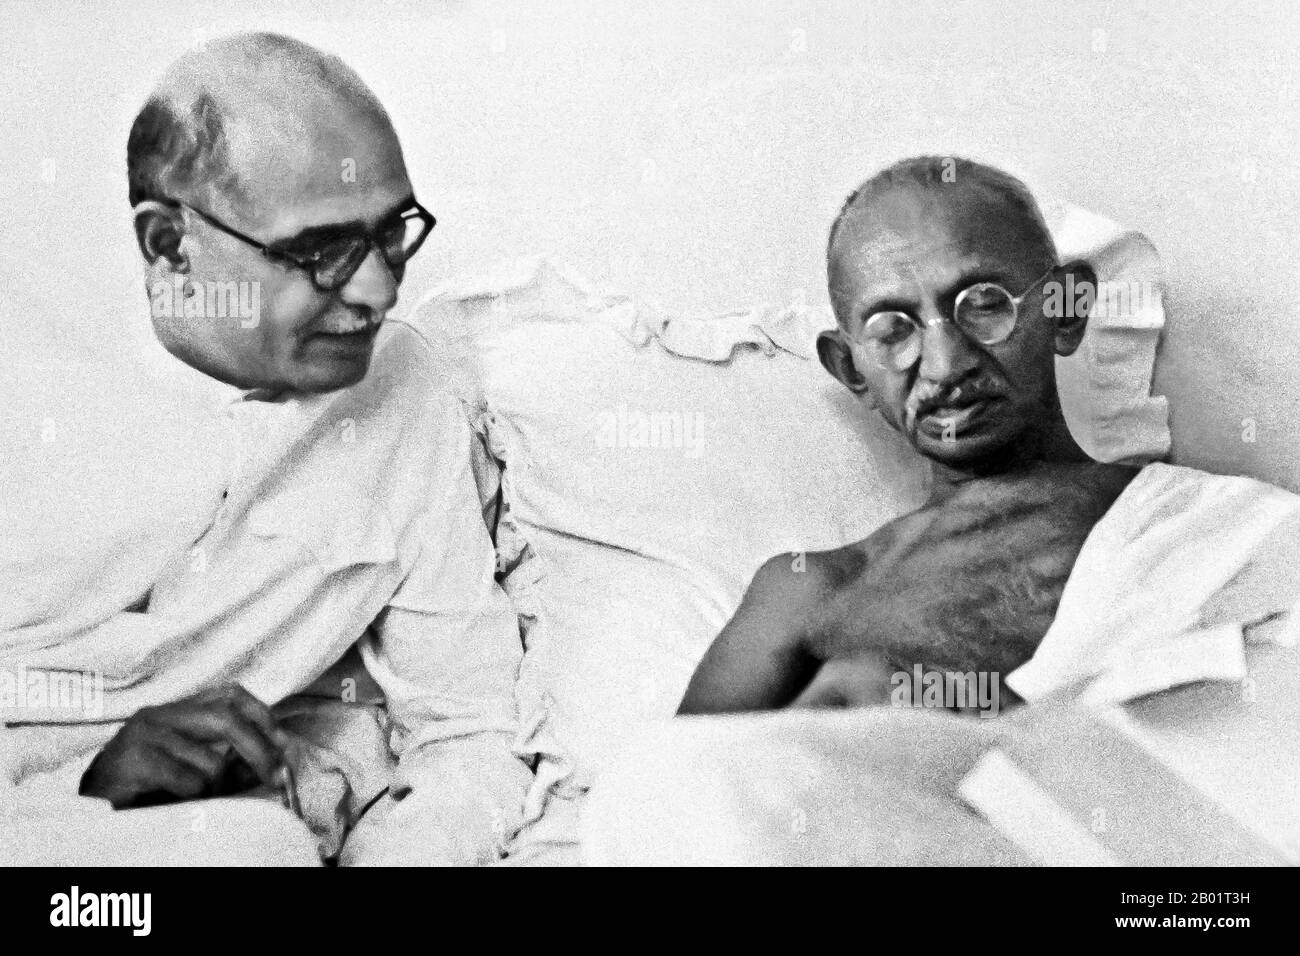 India: Mahatma Gandhi (2 October 1869 - 30 January 1948), preeminent political and ideological leader of India's independence movement, with his personal secretary Mahadev Desai (1892-1942), c. 1940.  Mohandas Karamchand Gandhi was the preeminent political and ideological leader of India during the Indian independence movement. He pioneered satyagraha. This is defined as resistance to tyranny through mass civil disobedience, a philosophy firmly founded upon ahimsa, or total non-violence. This concept helped India gain independence and inspired movements for civil rights and freedom globally. Stock Photo